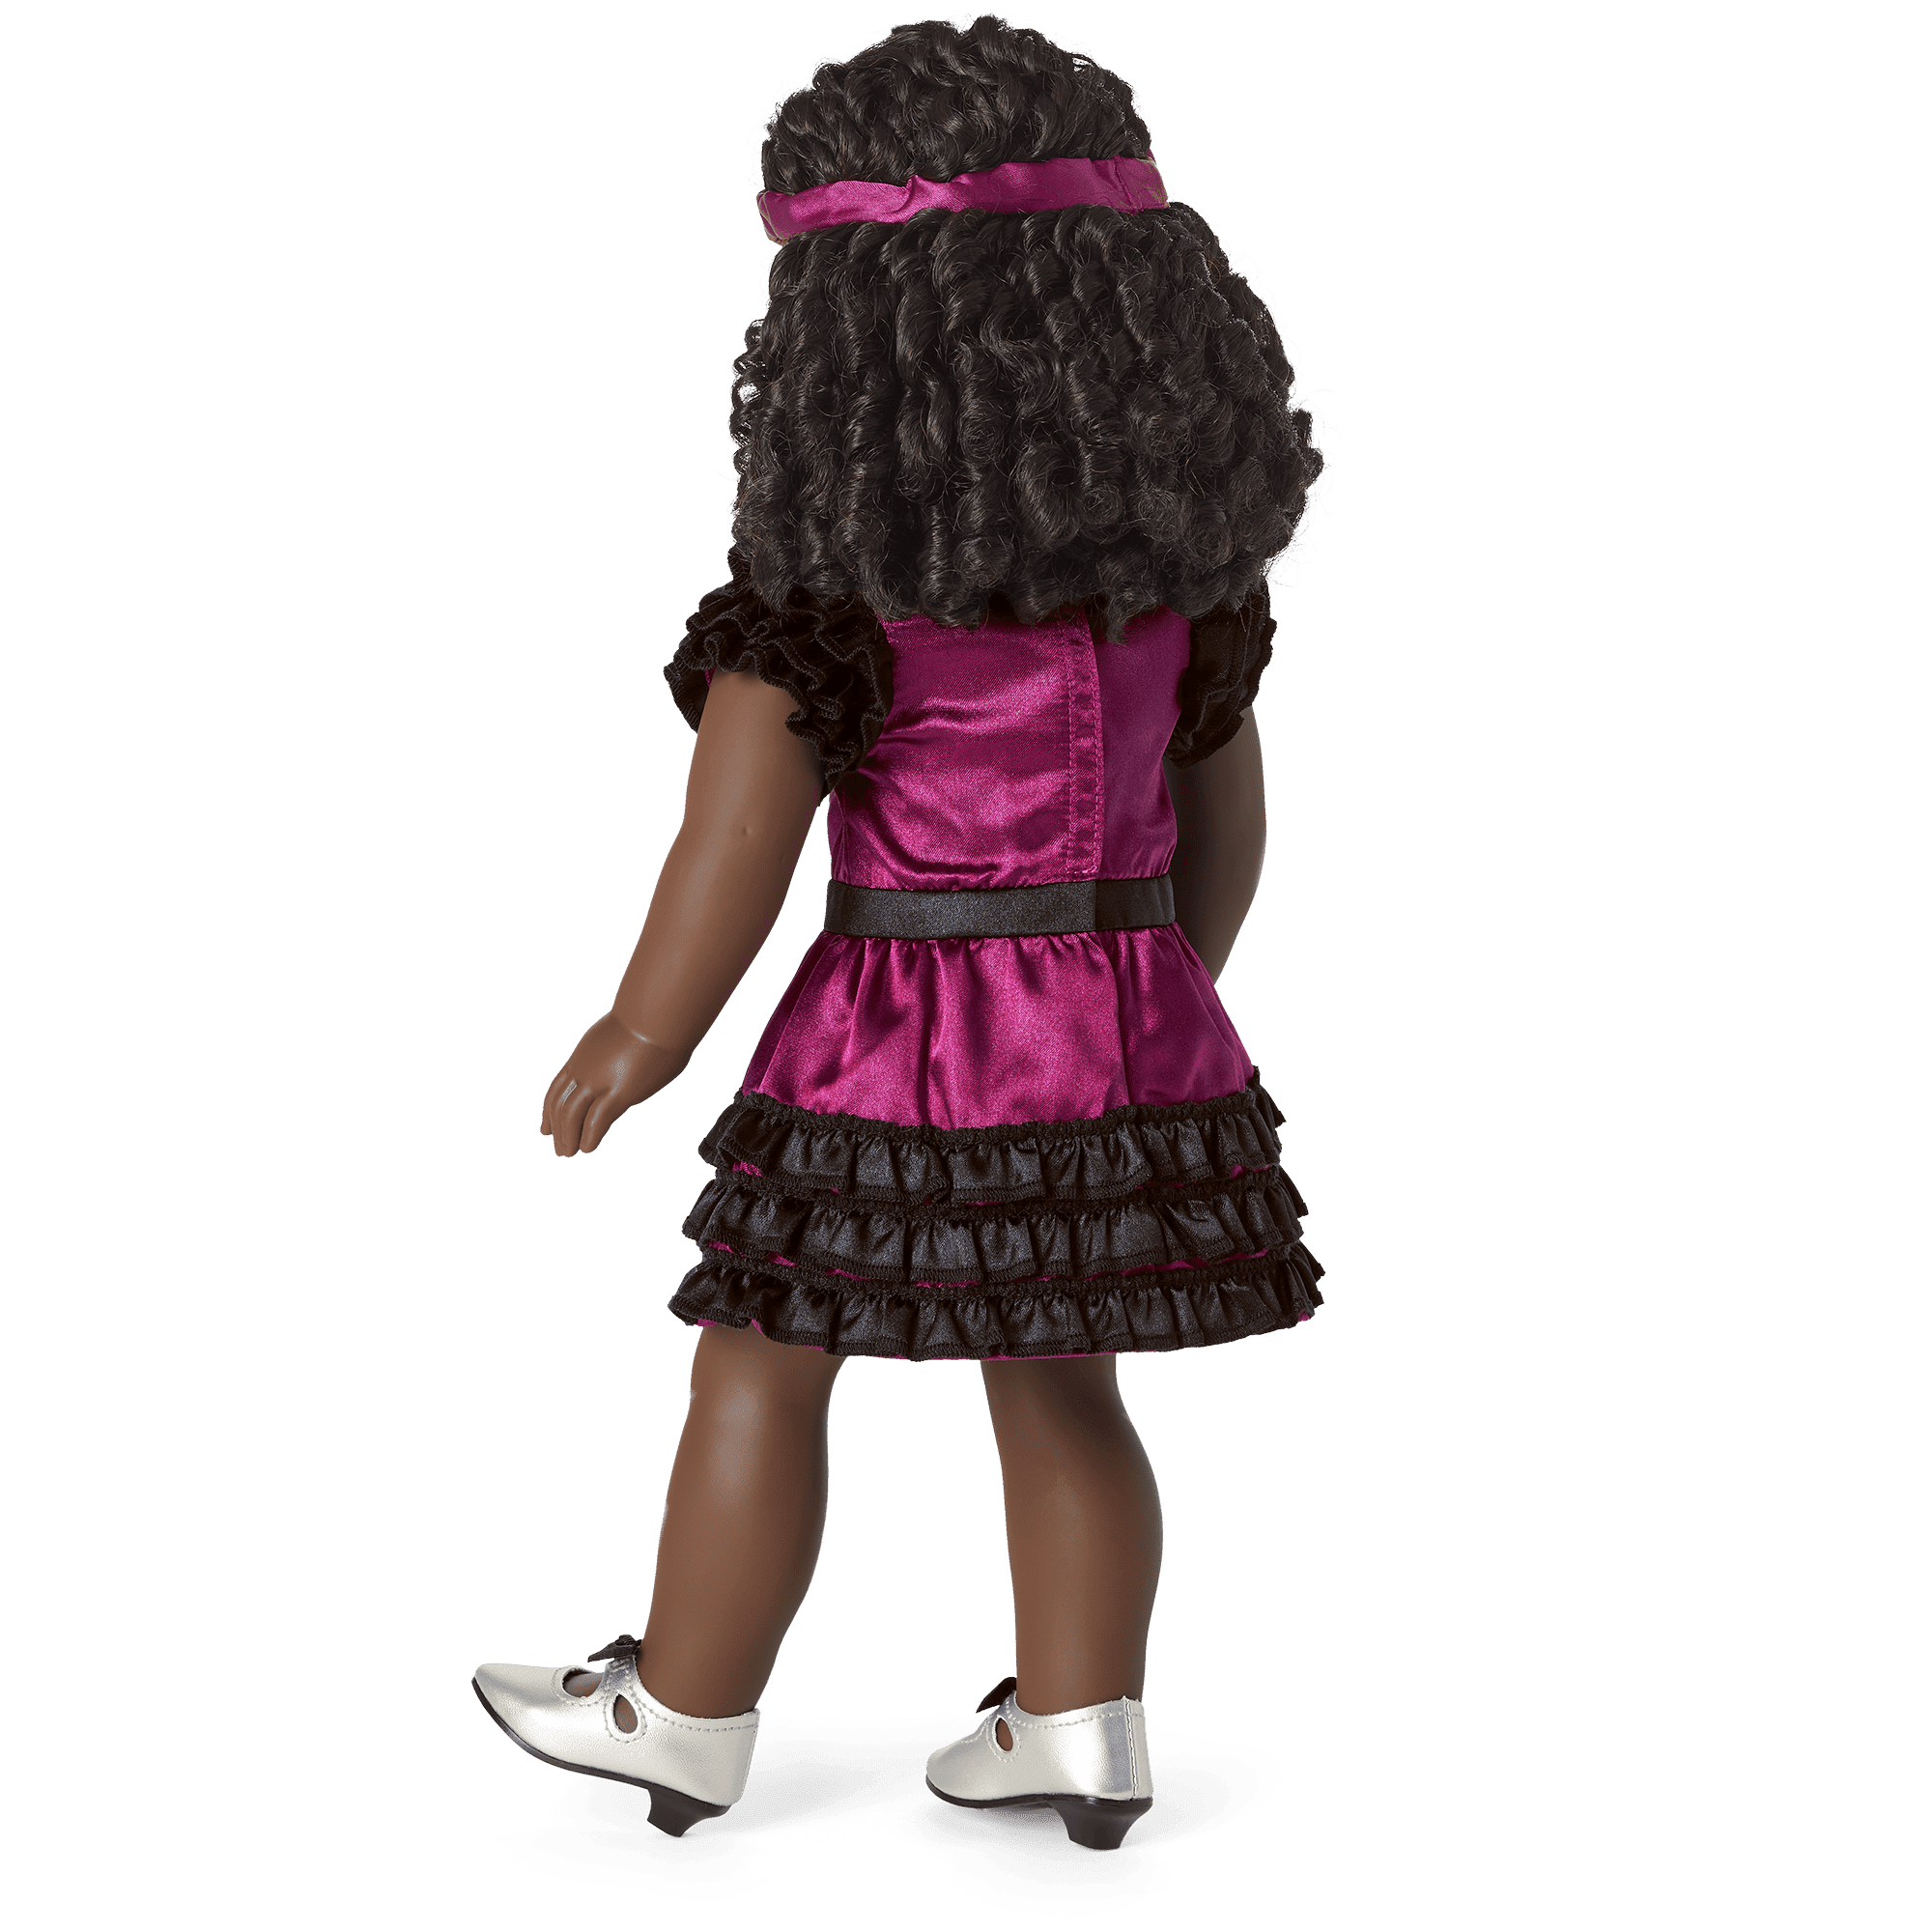 Claudie's™ Jazz Performance Outfit for 18-inch Dolls